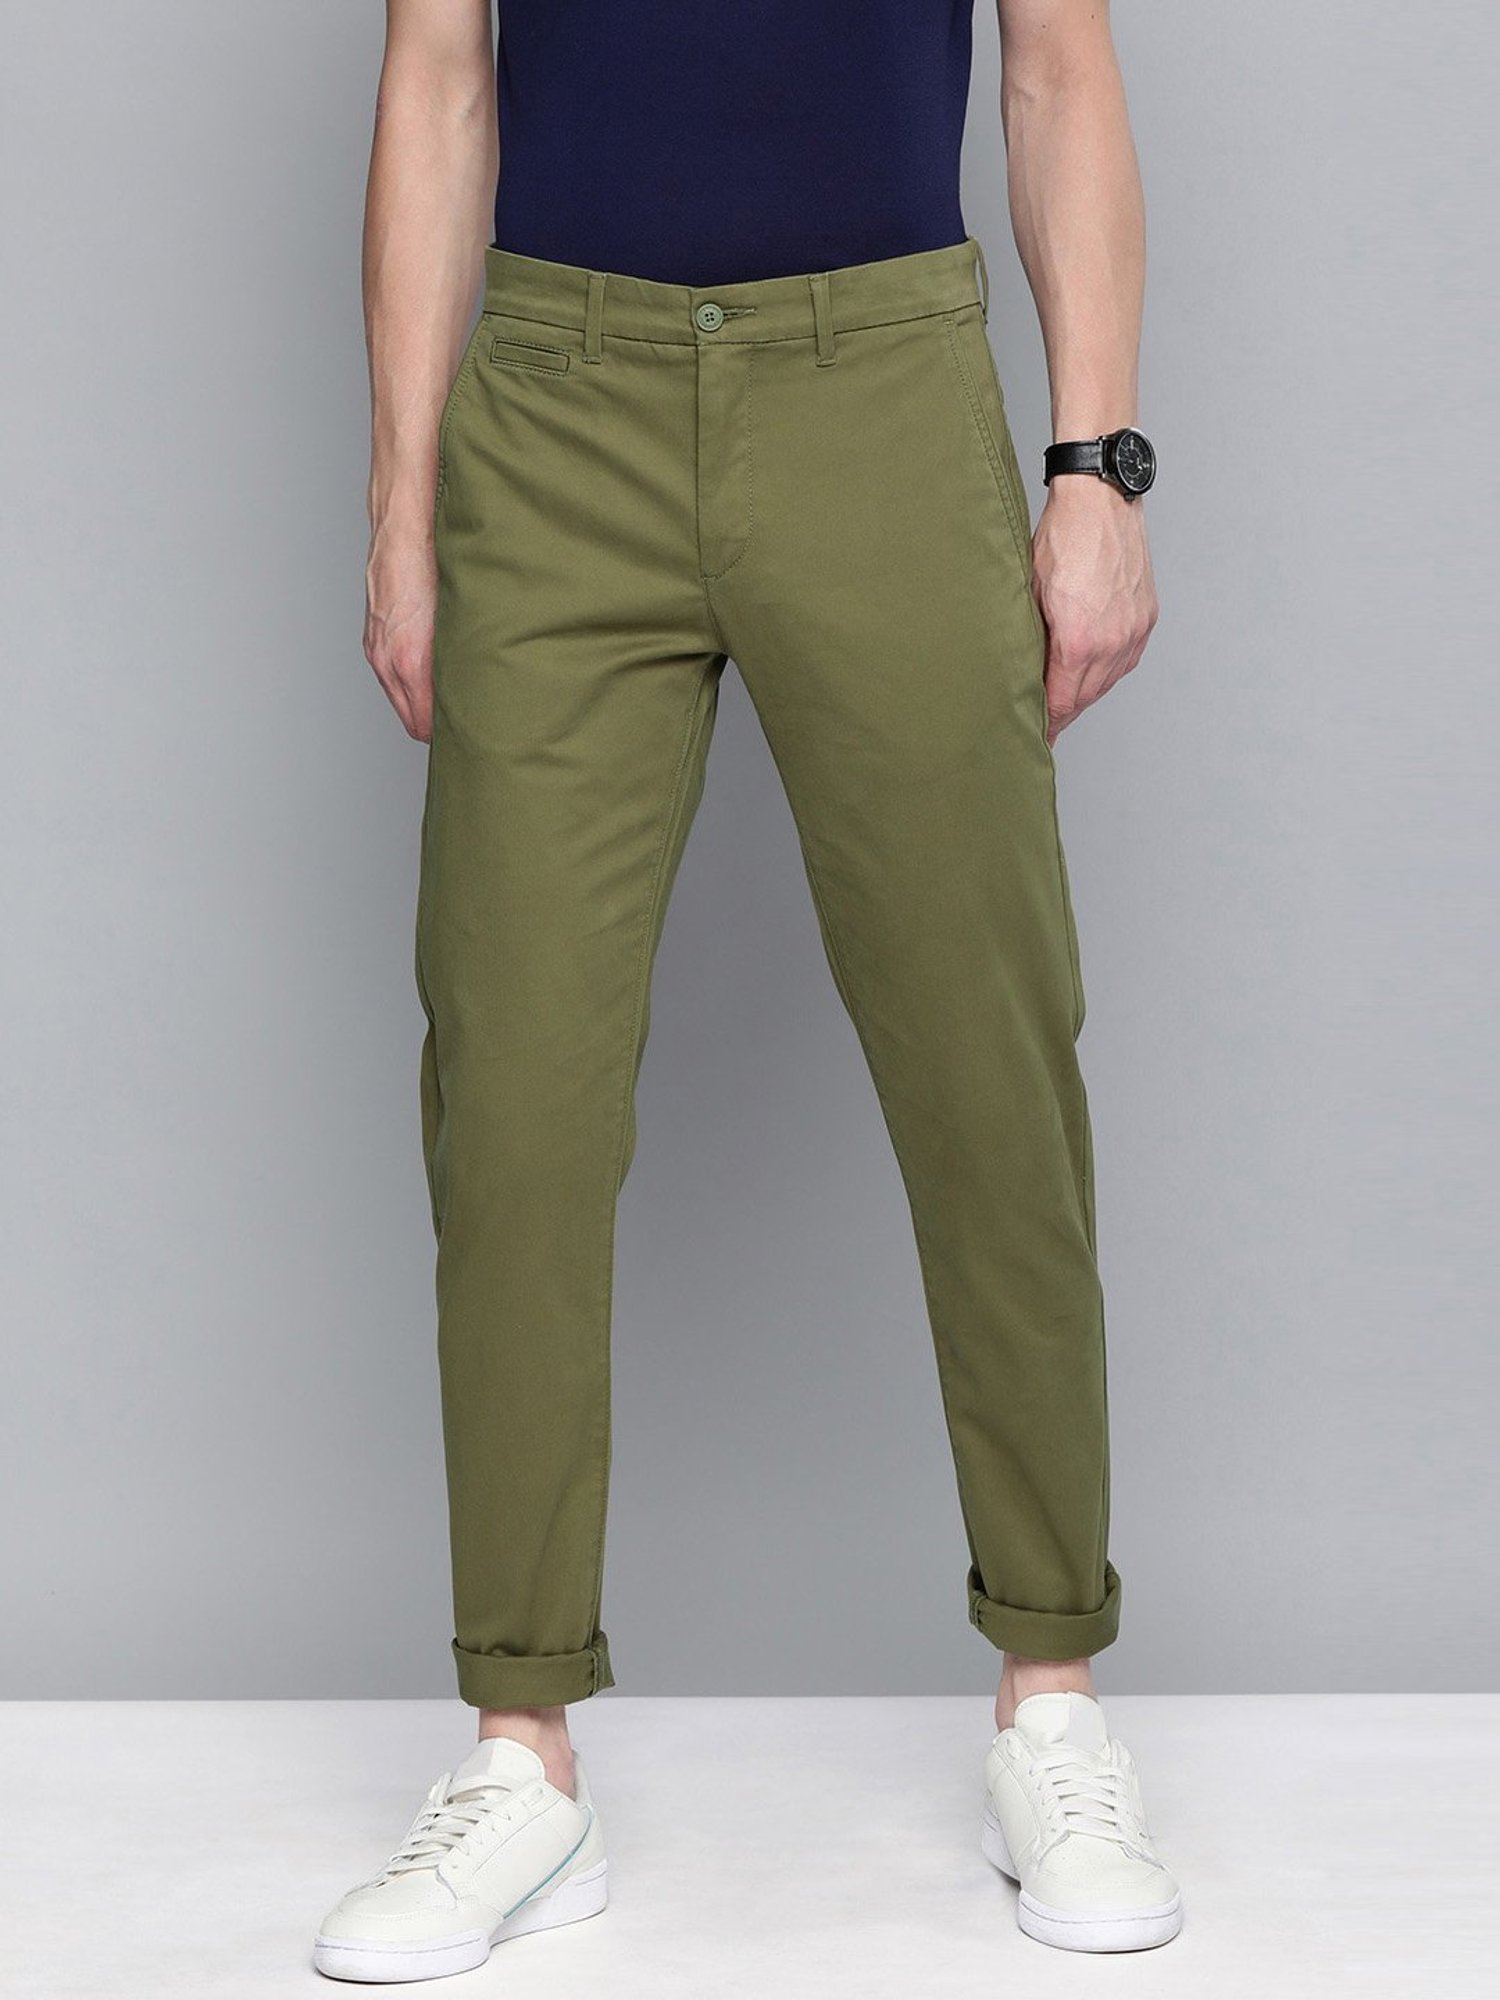 Stretch sage green merino wool limited-edition Trousers